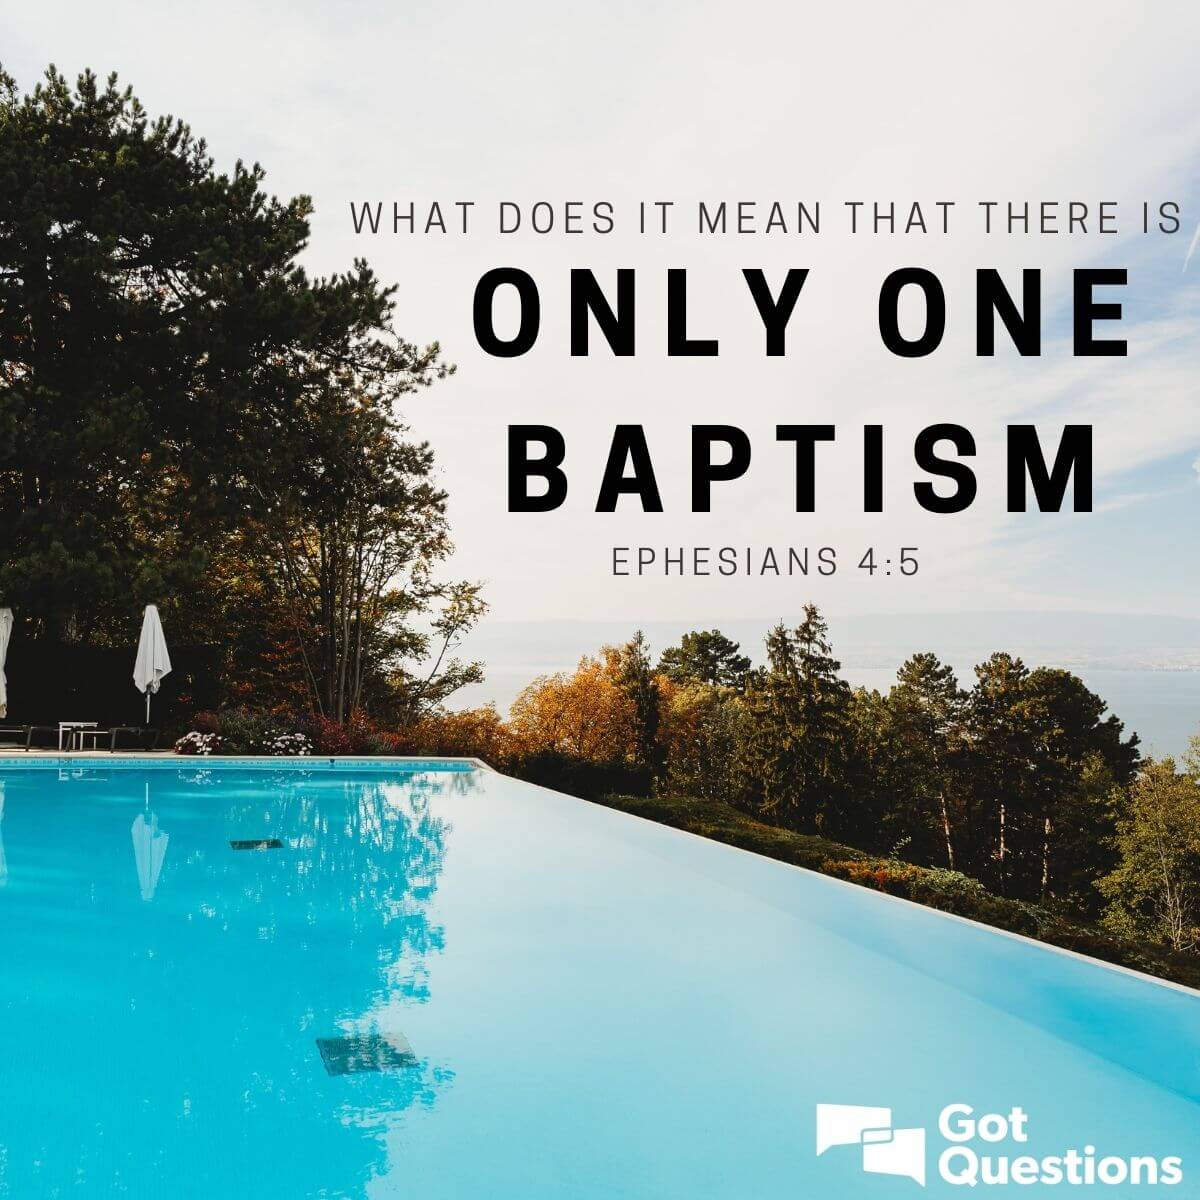 what-does-it-mean-that-there-is-only-one-baptism-ephesians-4-5